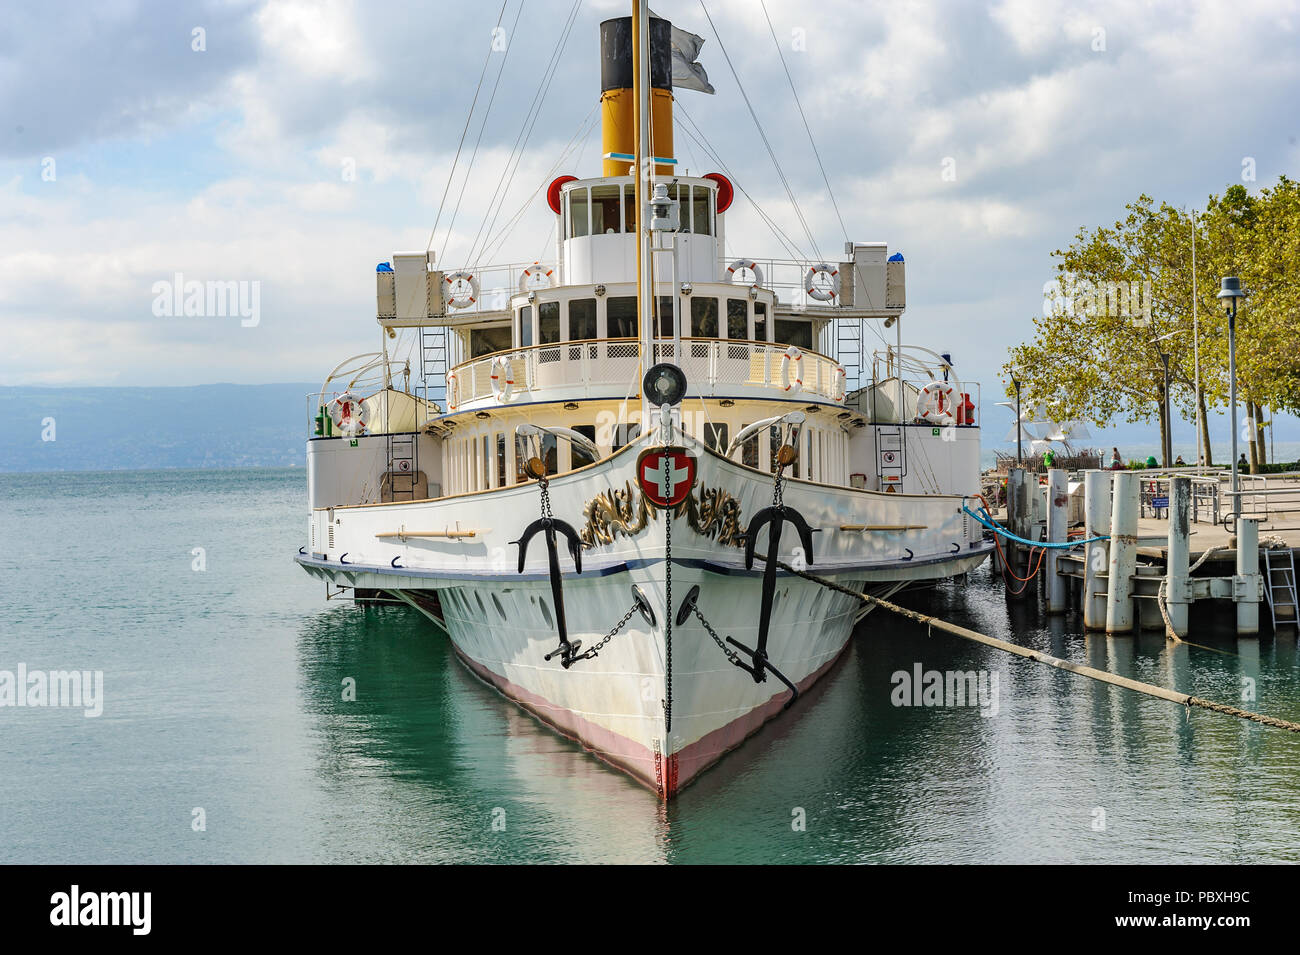 A paddle steamer, a unique and modern restored steamboat as commuter passenger ferry on Lake Geneva, Switzerland Stock Photo